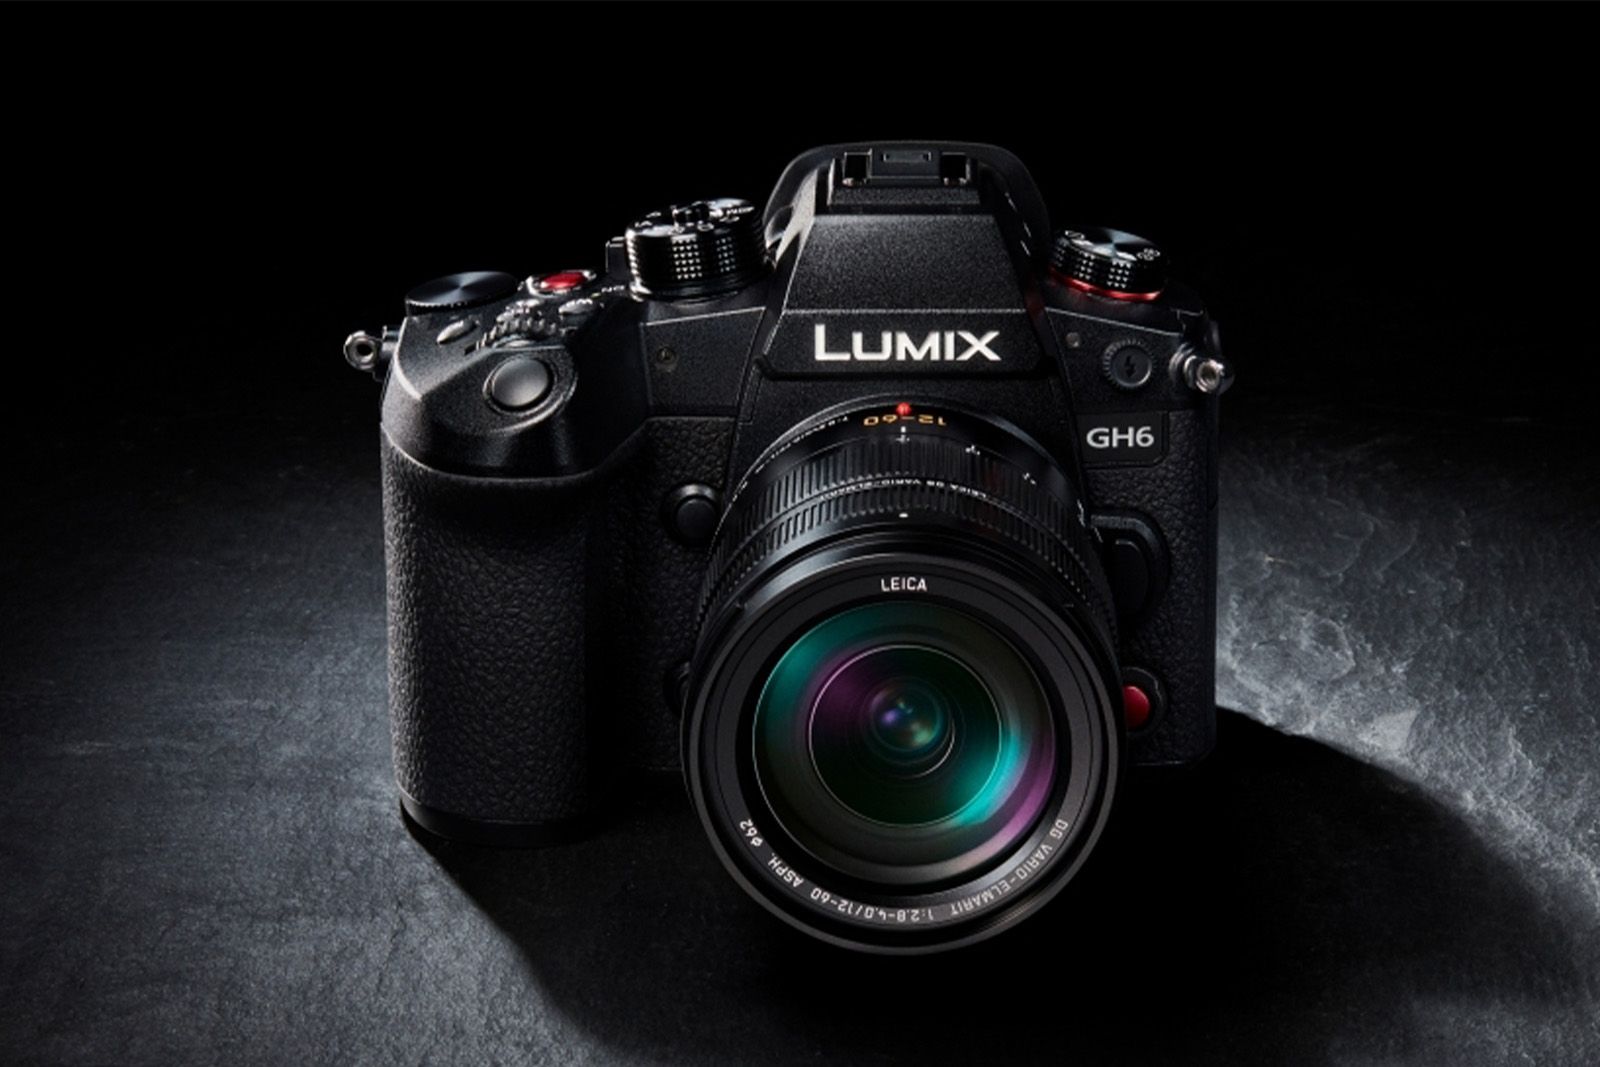 The Panasonic GH6 hits the scene with a brand new sensor and 5.7K ProRes photo 1